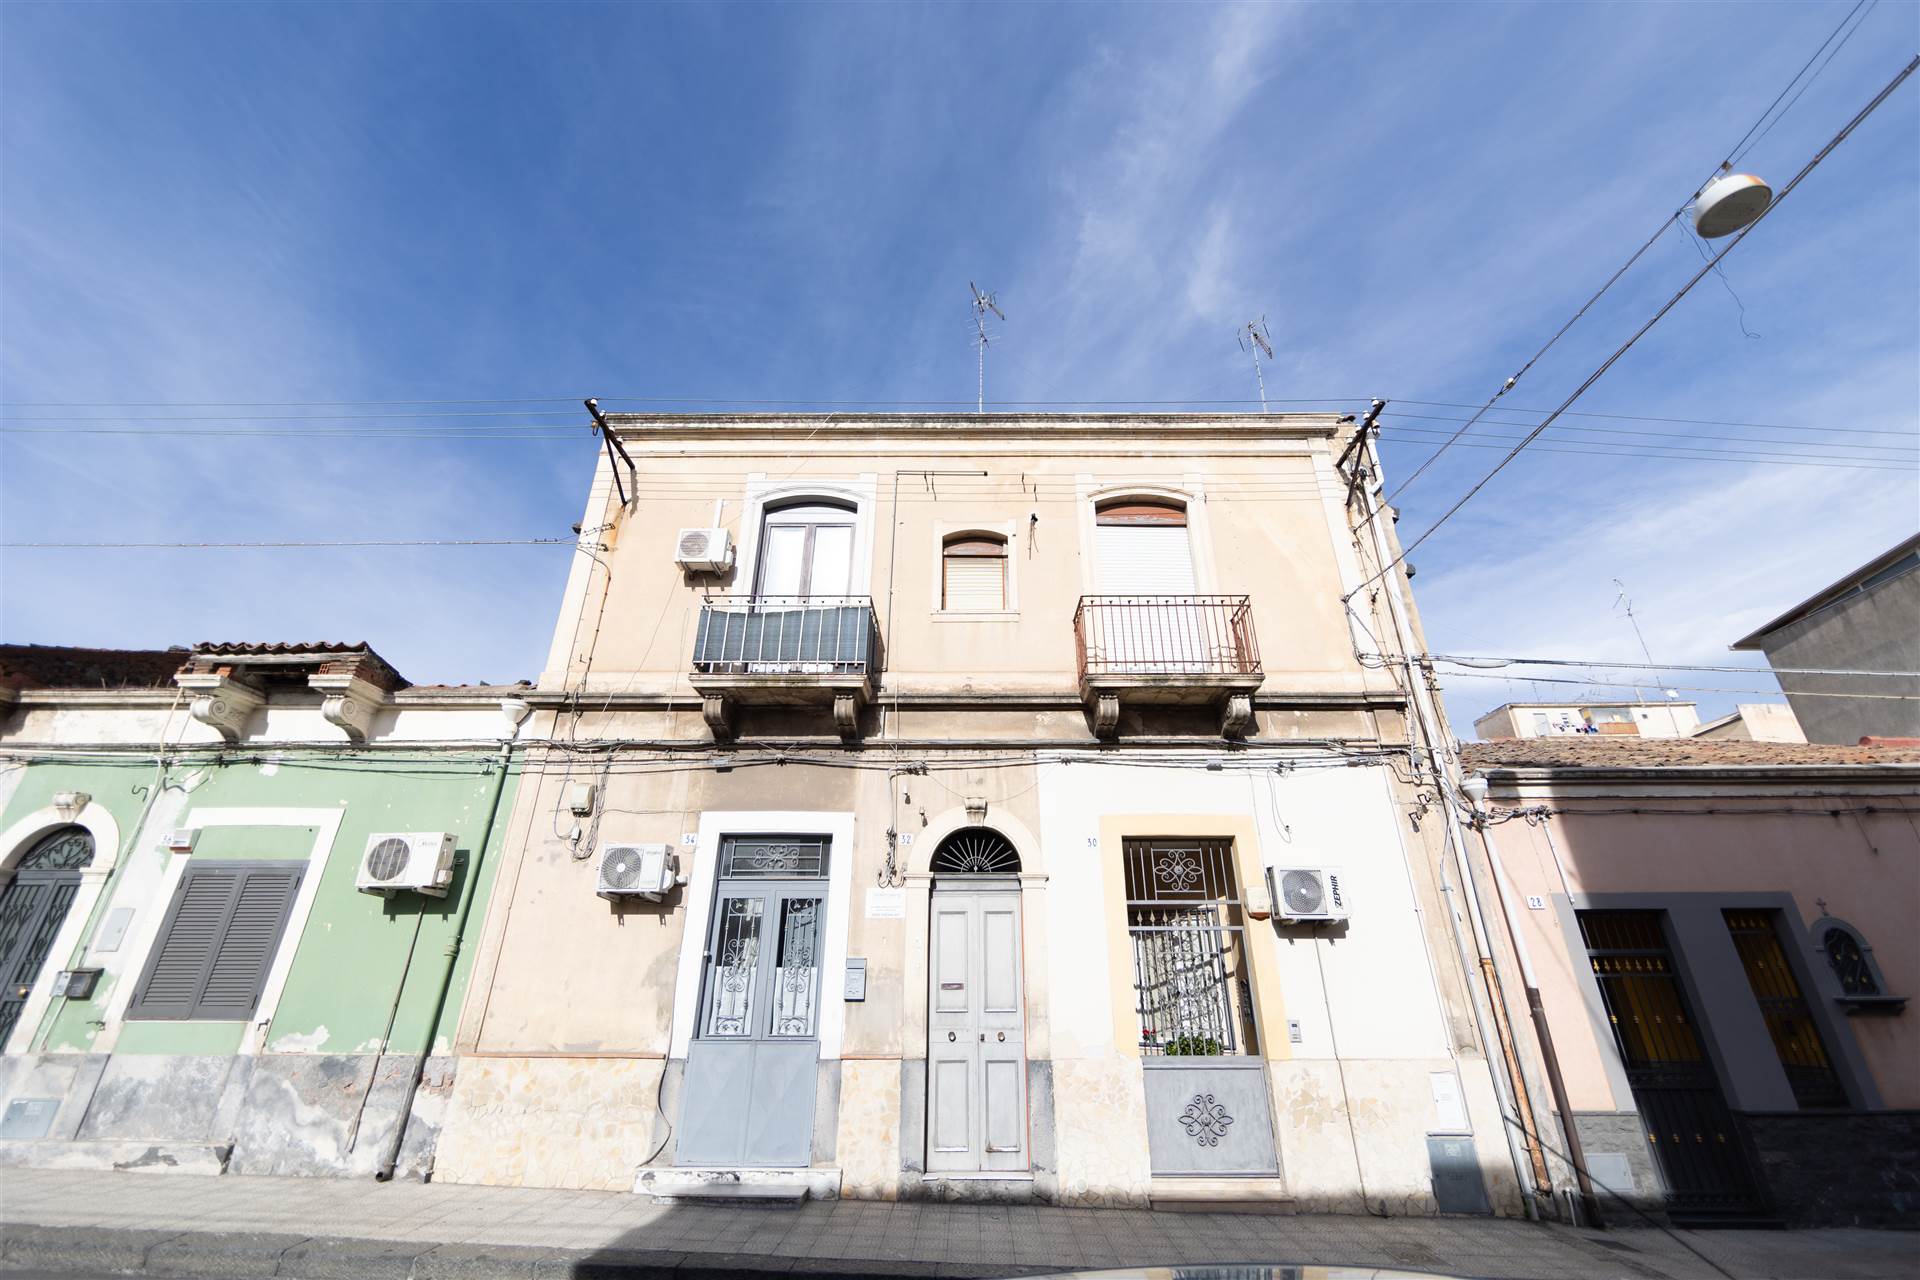 CIBALI, CATANIA, Semi detached house for sale of 112 Sq. mt., Be restored, Heating Non-existent, Energetic class: G, placed at 1°, composed by: 4.5 